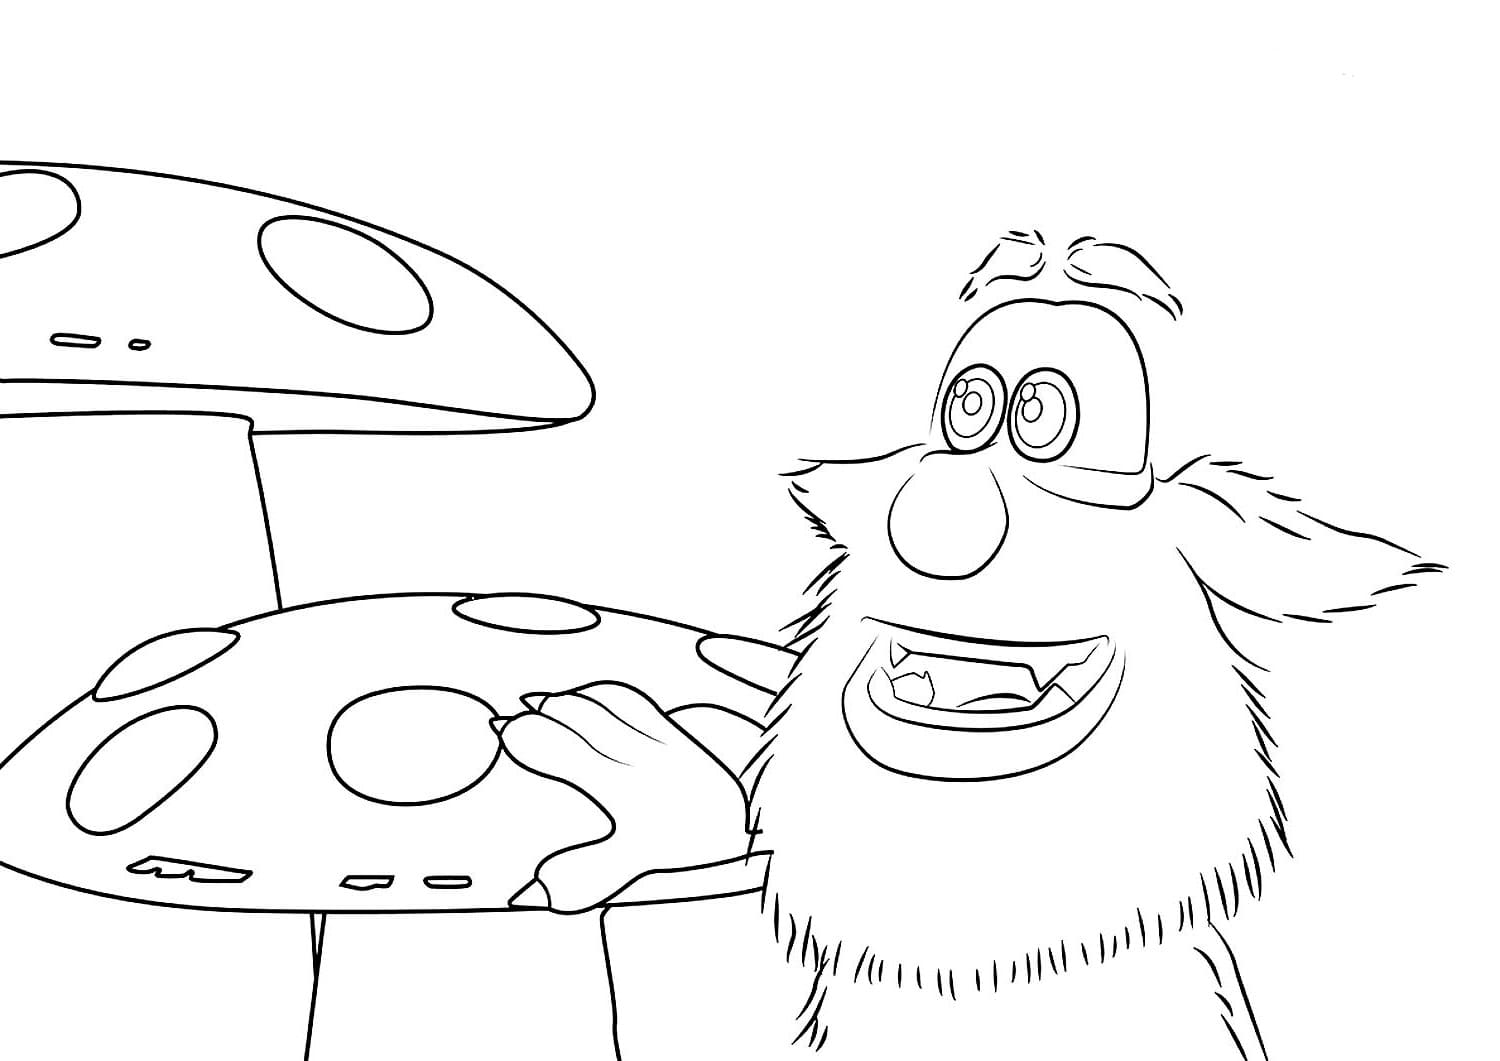 Booba In Mushrooms Coloring Page